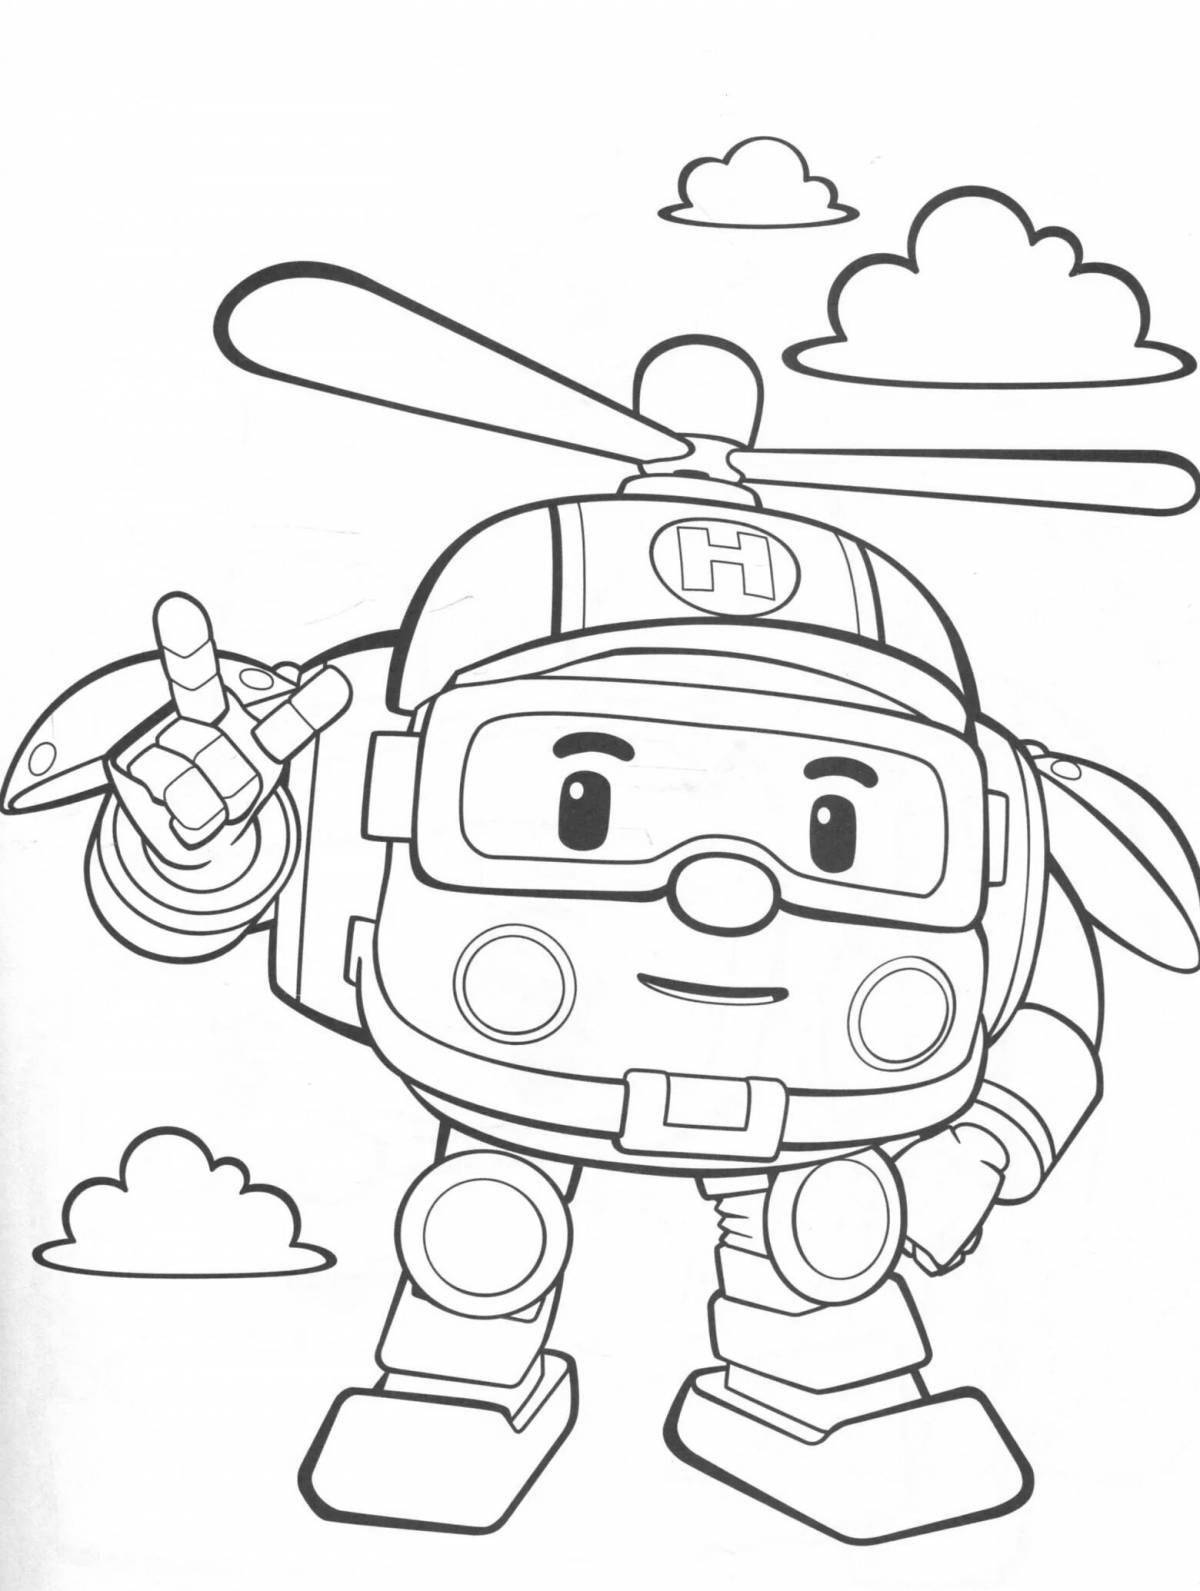 Robocar poli and his friends animated coloring page